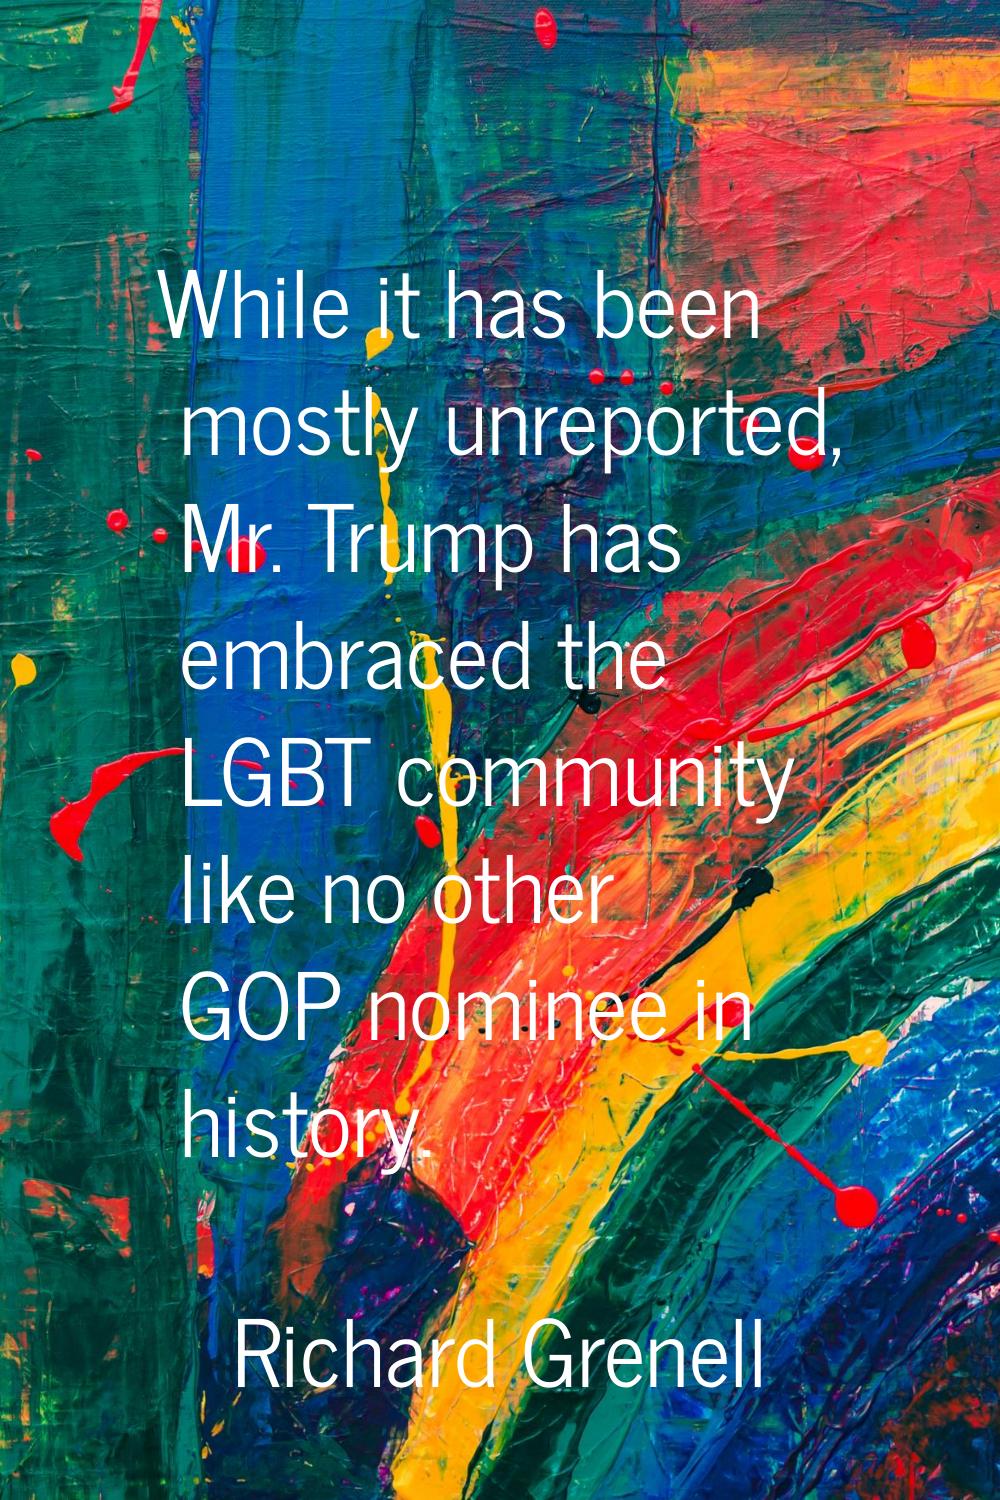 While it has been mostly unreported, Mr. Trump has embraced the LGBT community like no other GOP no